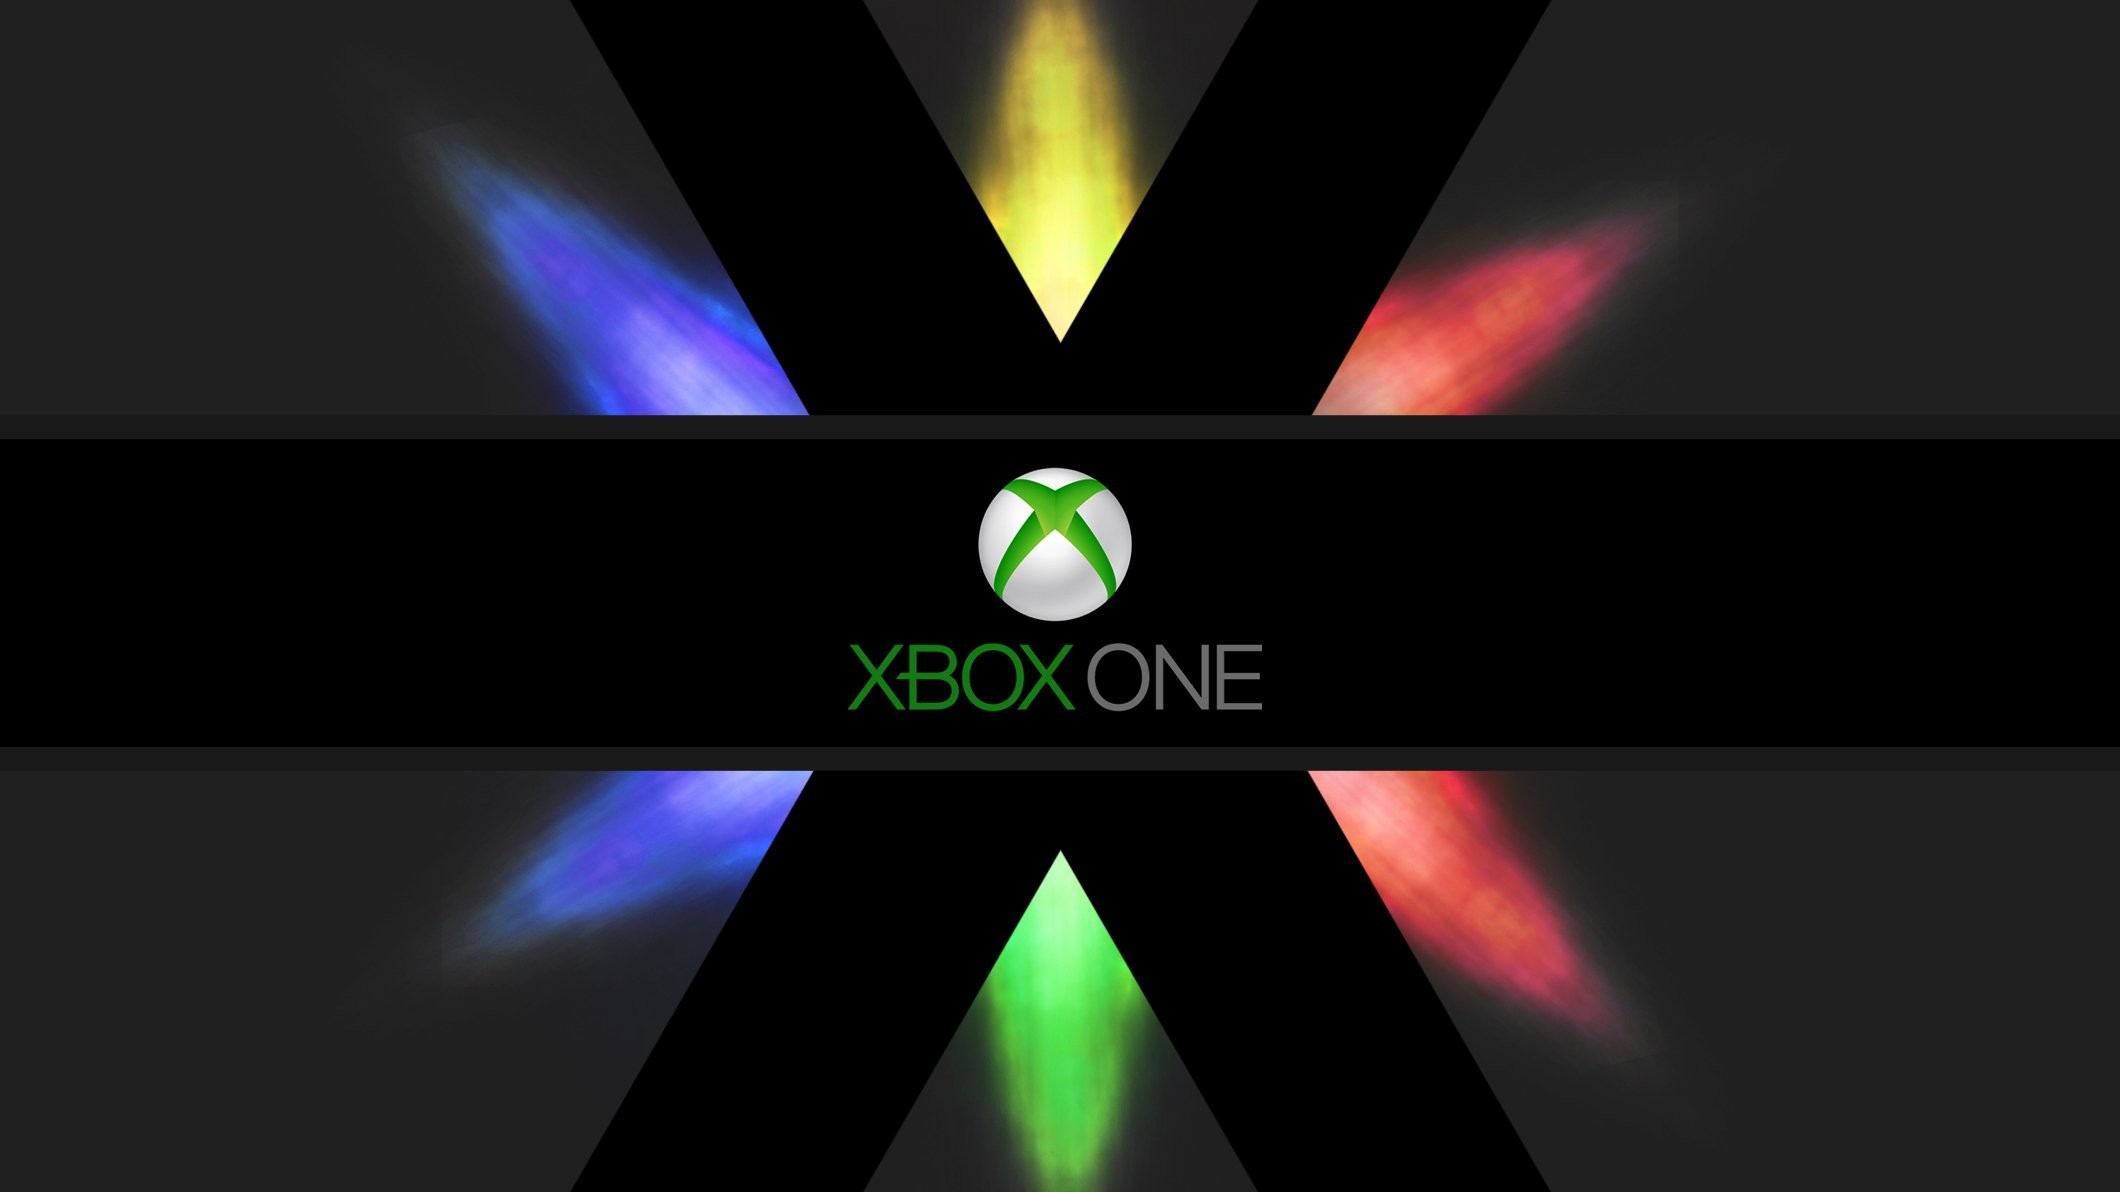 XBOX ONE video game system microsoft wallpaper background HTML code